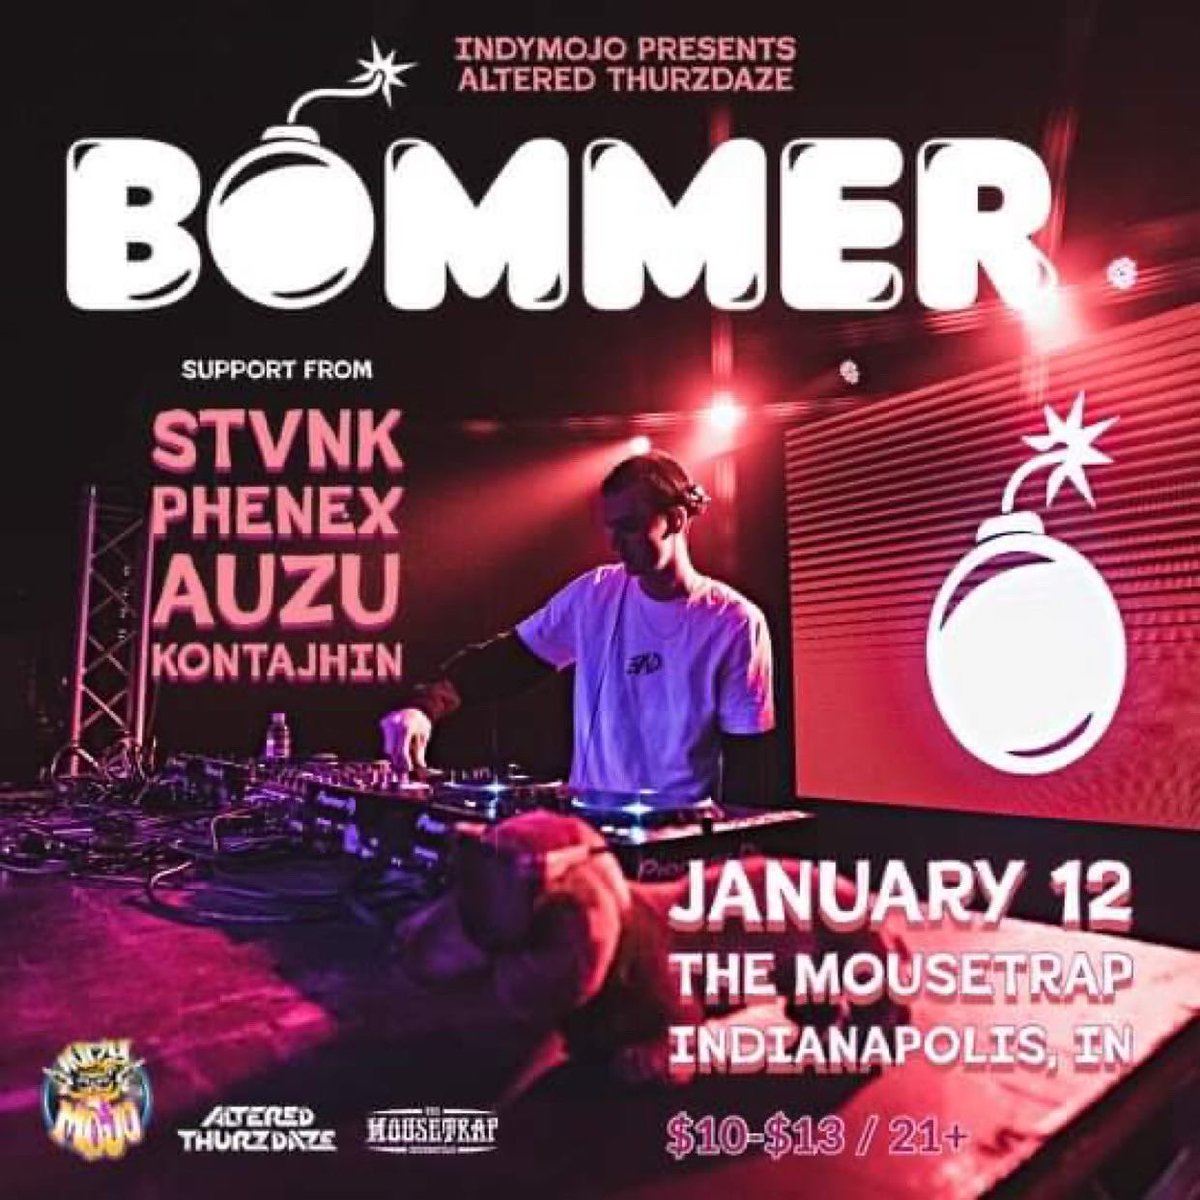 TONIGHT INDIANAPOLIS 

ALTERED THURZDAZE W/ @Bommer_Official 💣💥

I'LL BE PLAYING AFTER THE MAN HIMSELF 
1:15 AM - 3:00 AM